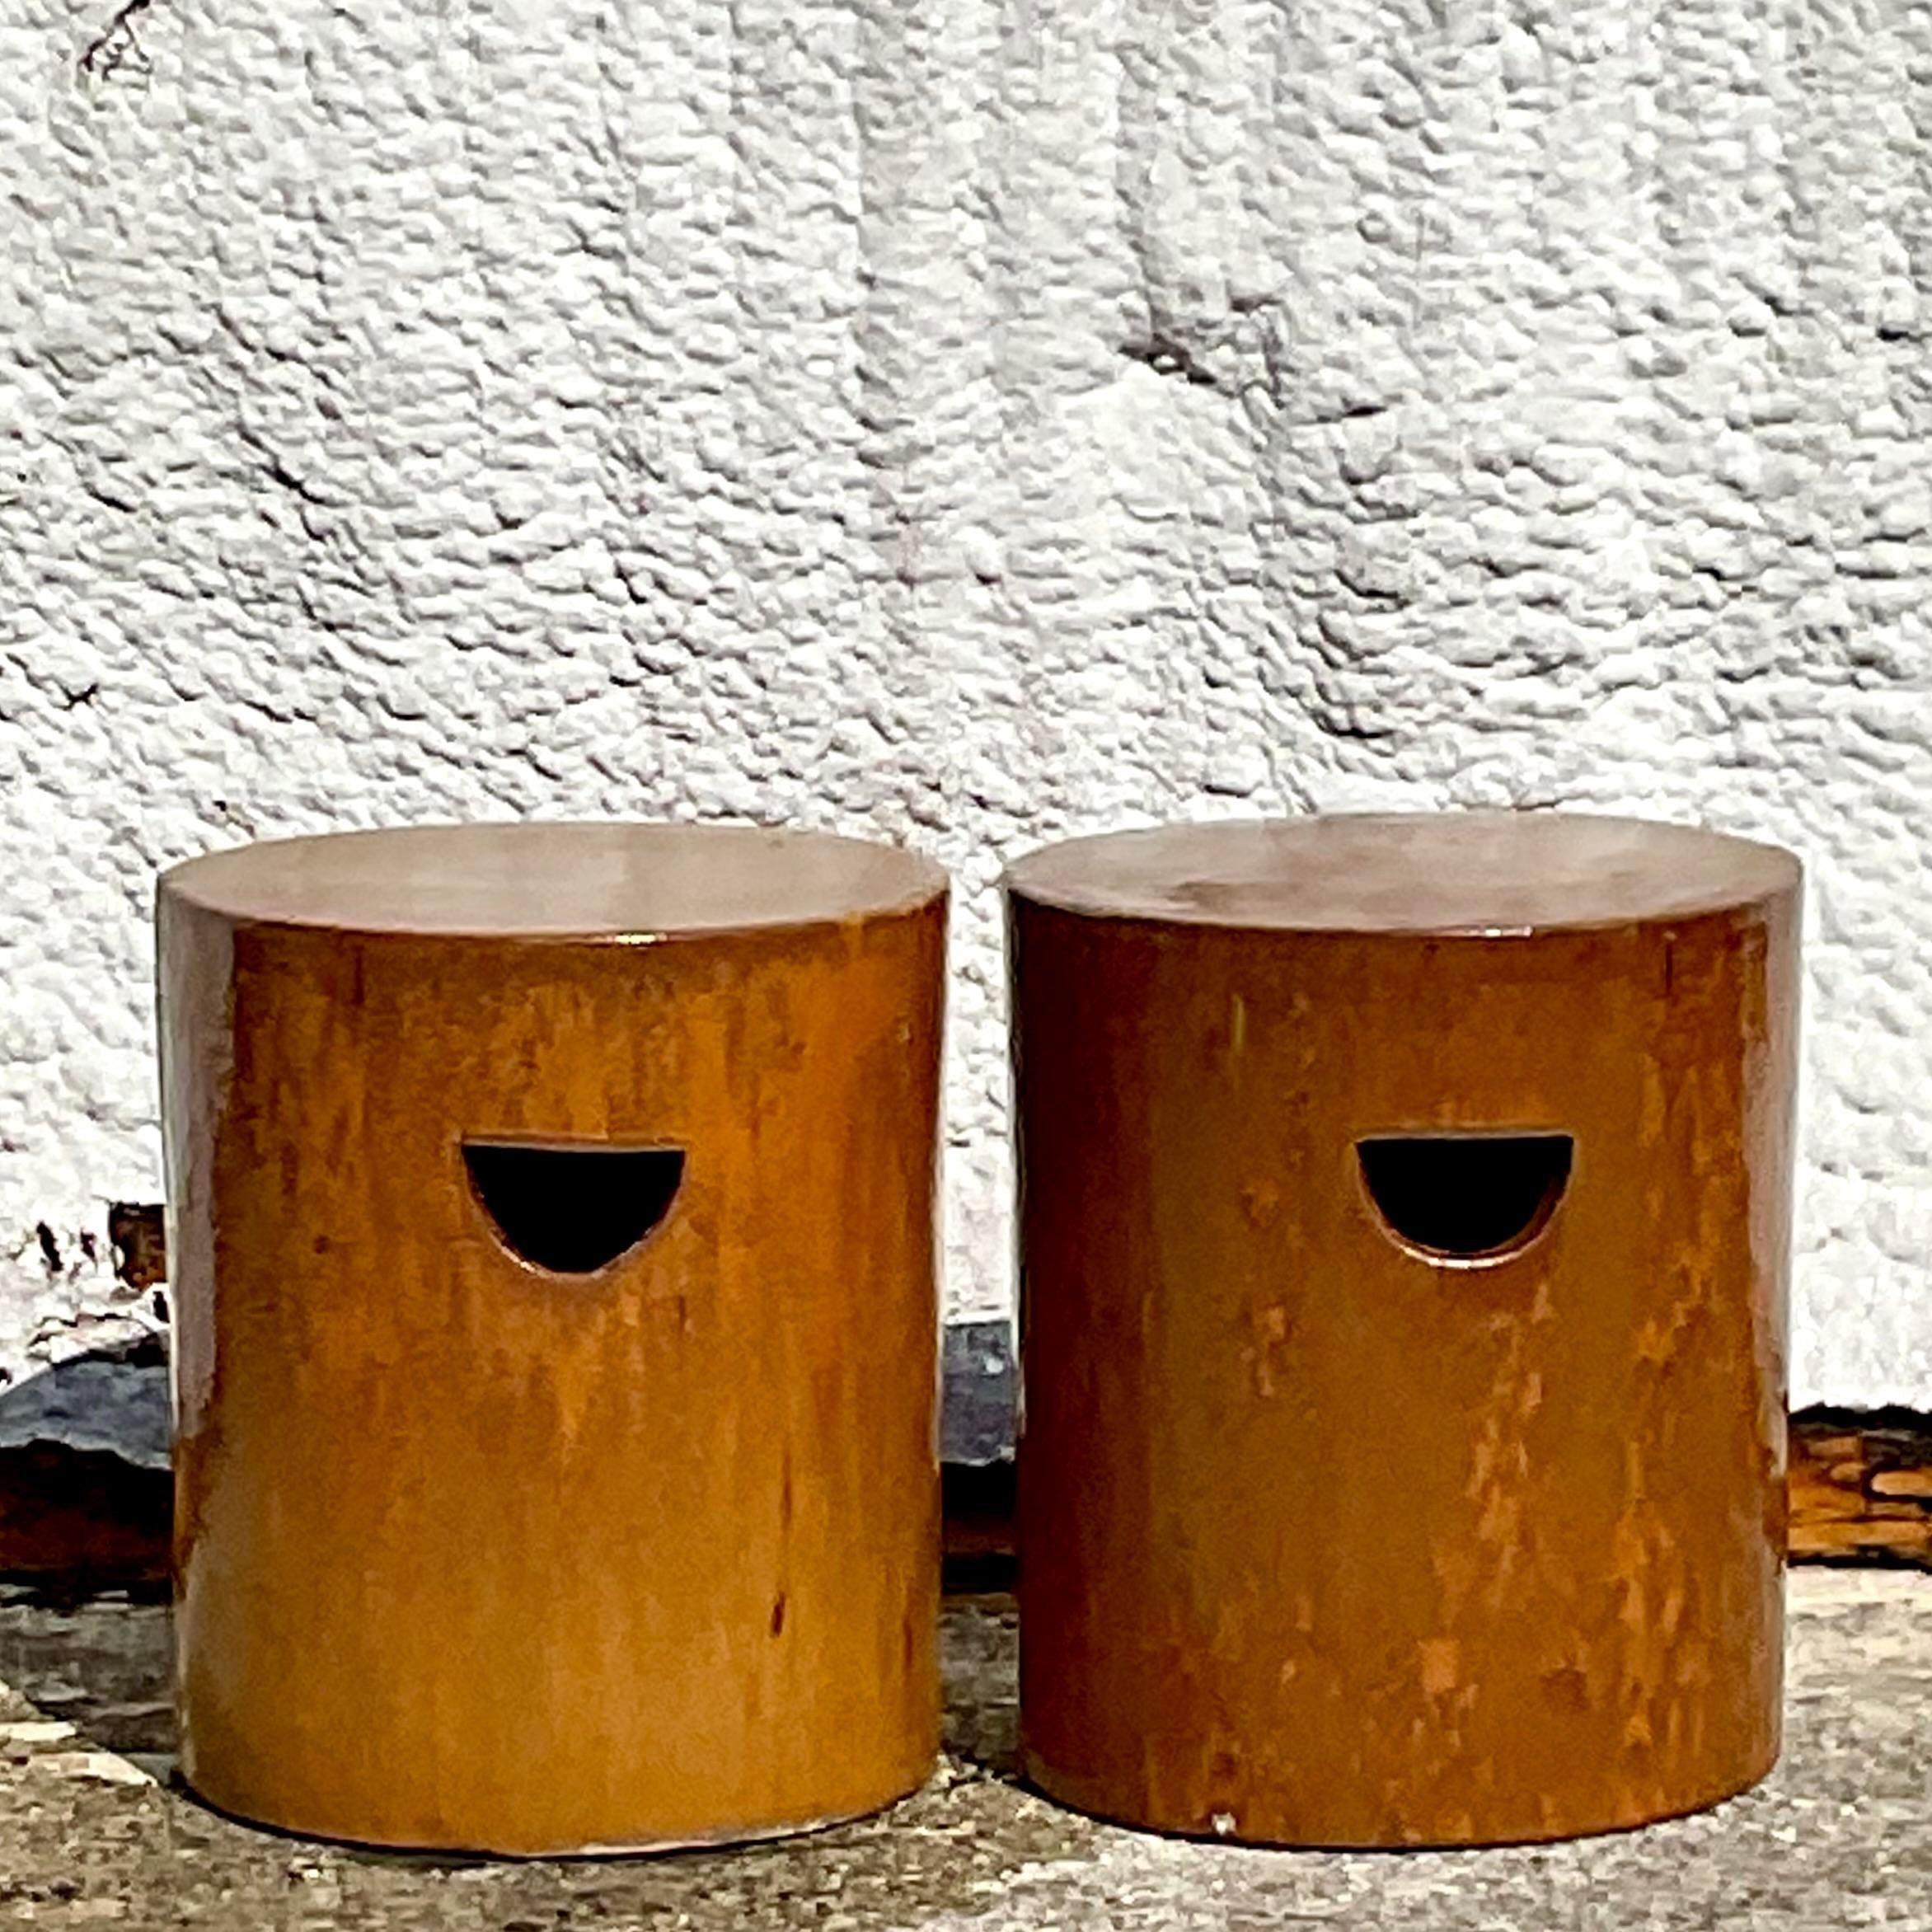 A fabulous pair of Boho low ceramic stools. A chic glazed finish in a warm orange finish. Perfect indoors or out. You decide! Acquired from a Palm Beach estate.